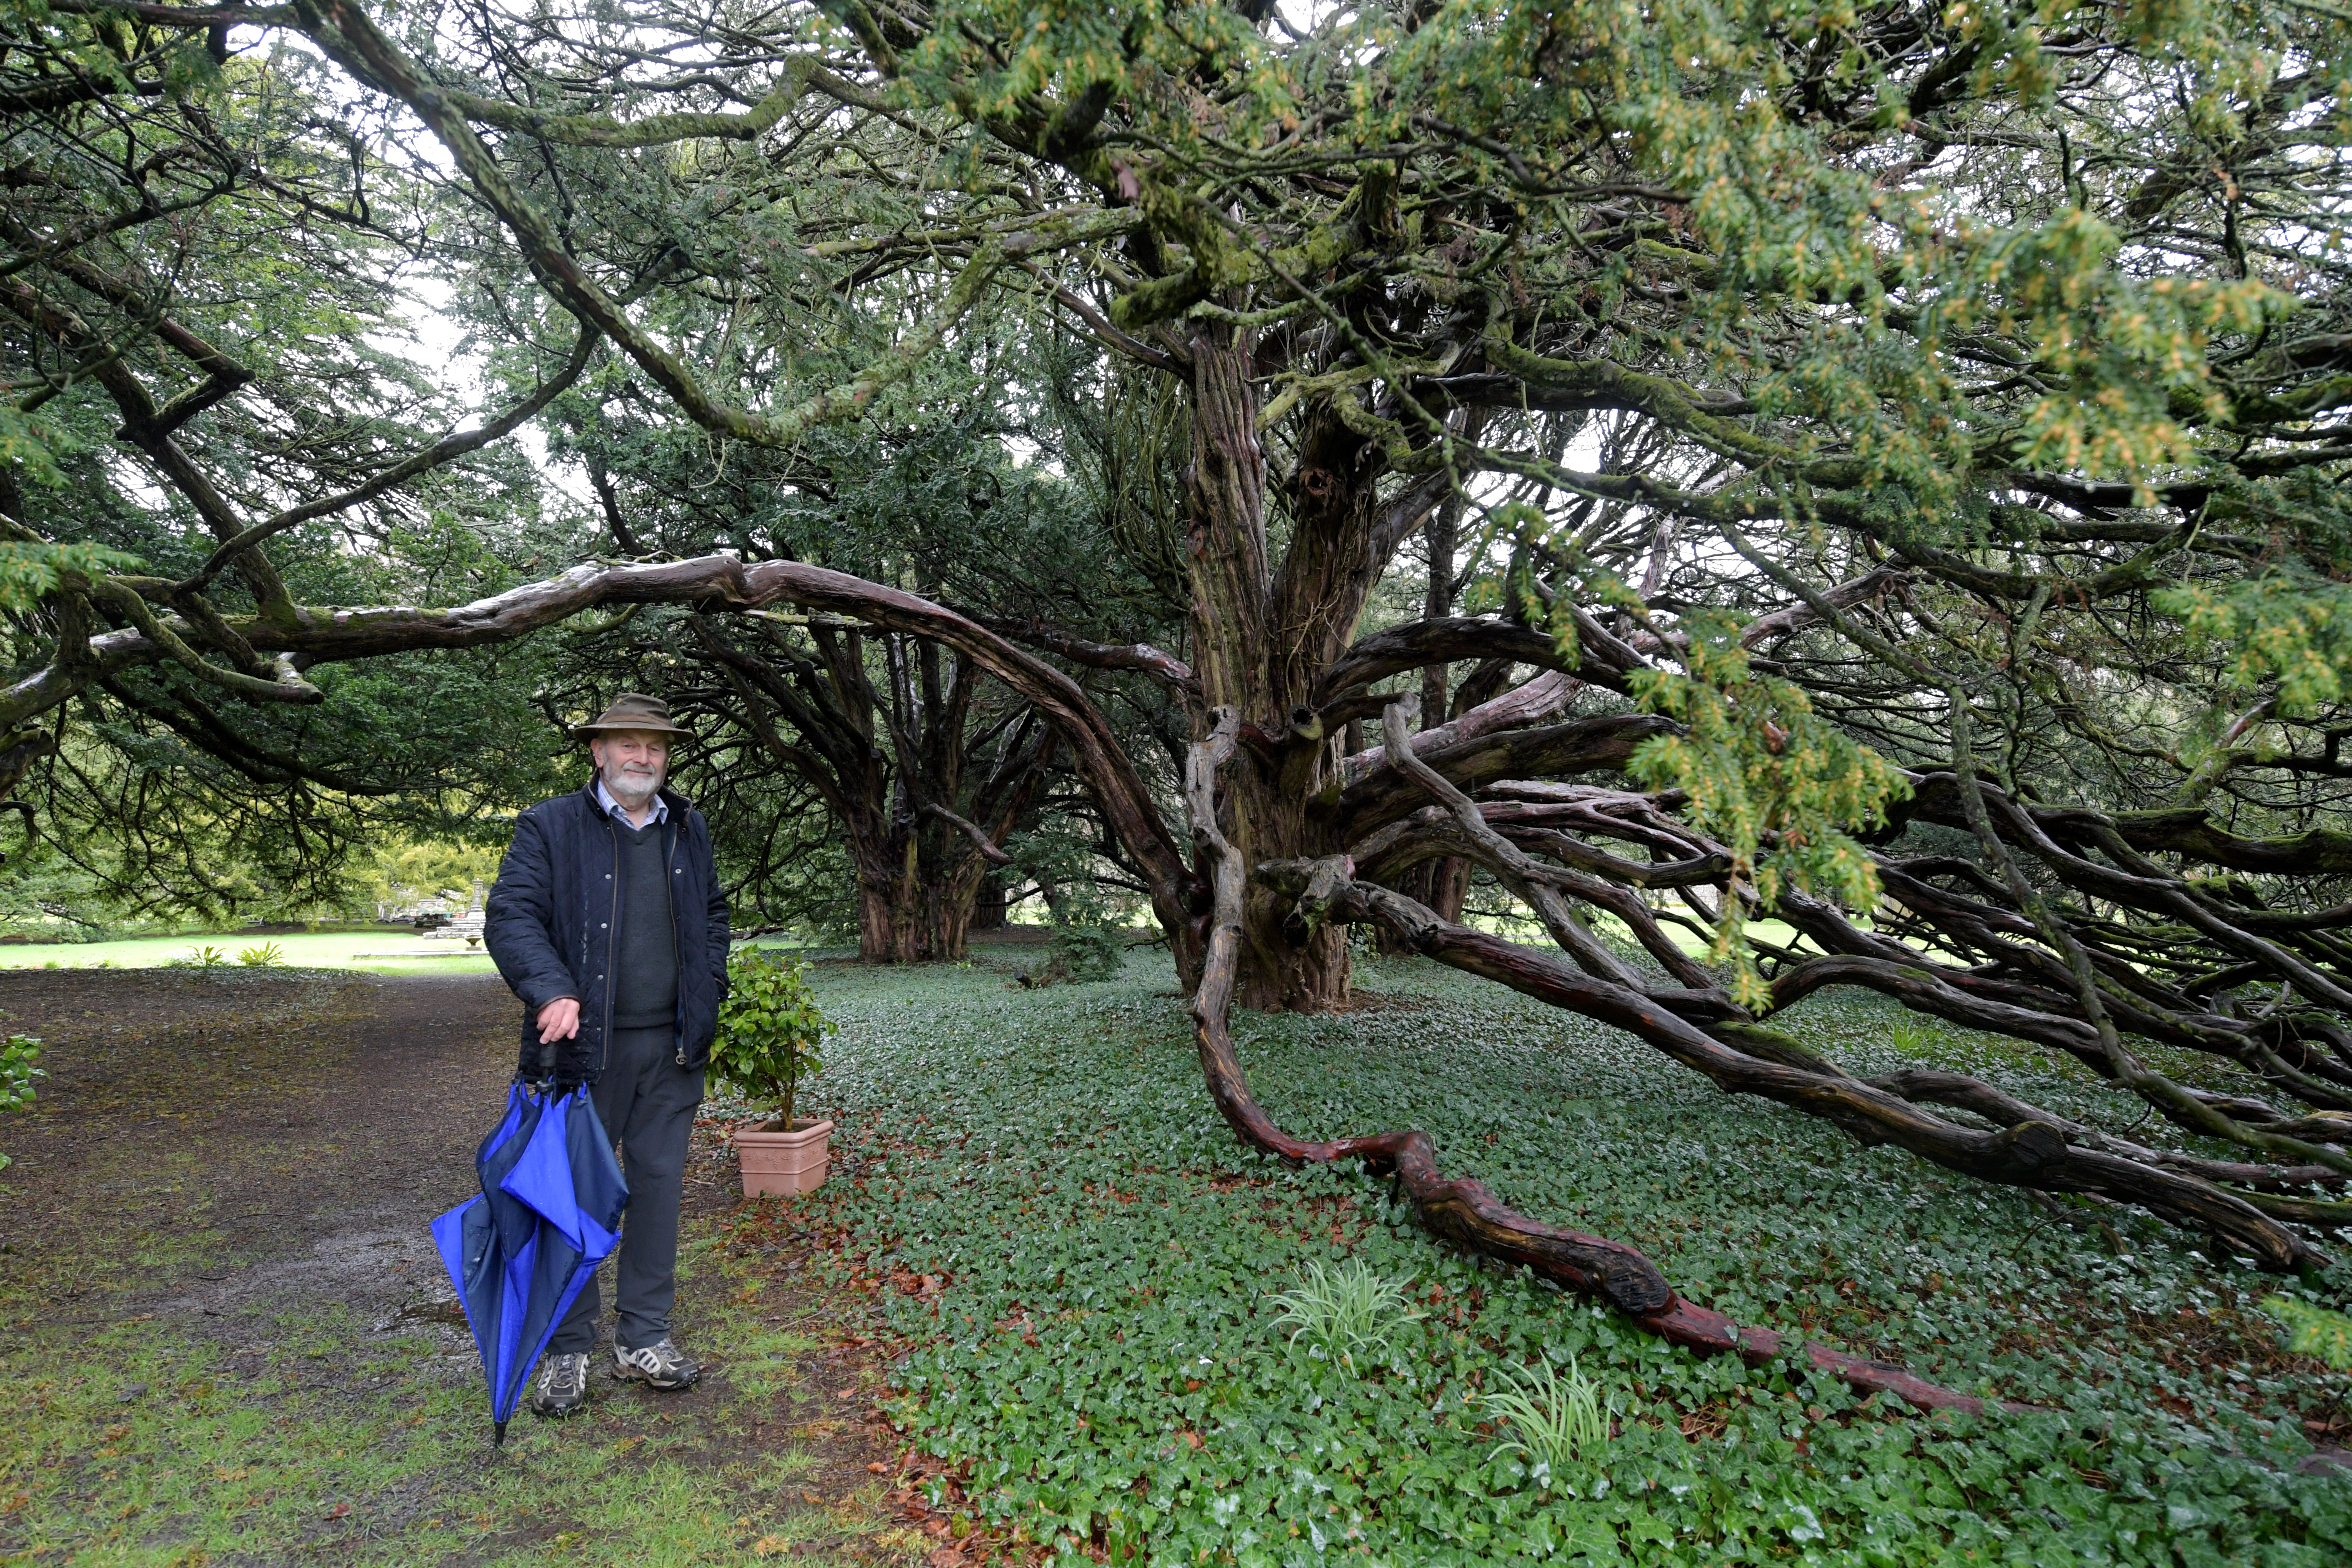 A planning application has been approved for a car park and toilets at Ellon Castle gardens. Alan Cameron is pictured beside the English Ewe trees, there are 16 trees and they are believed to be the biggest collection of English Ewe Trees in Northern Europe.